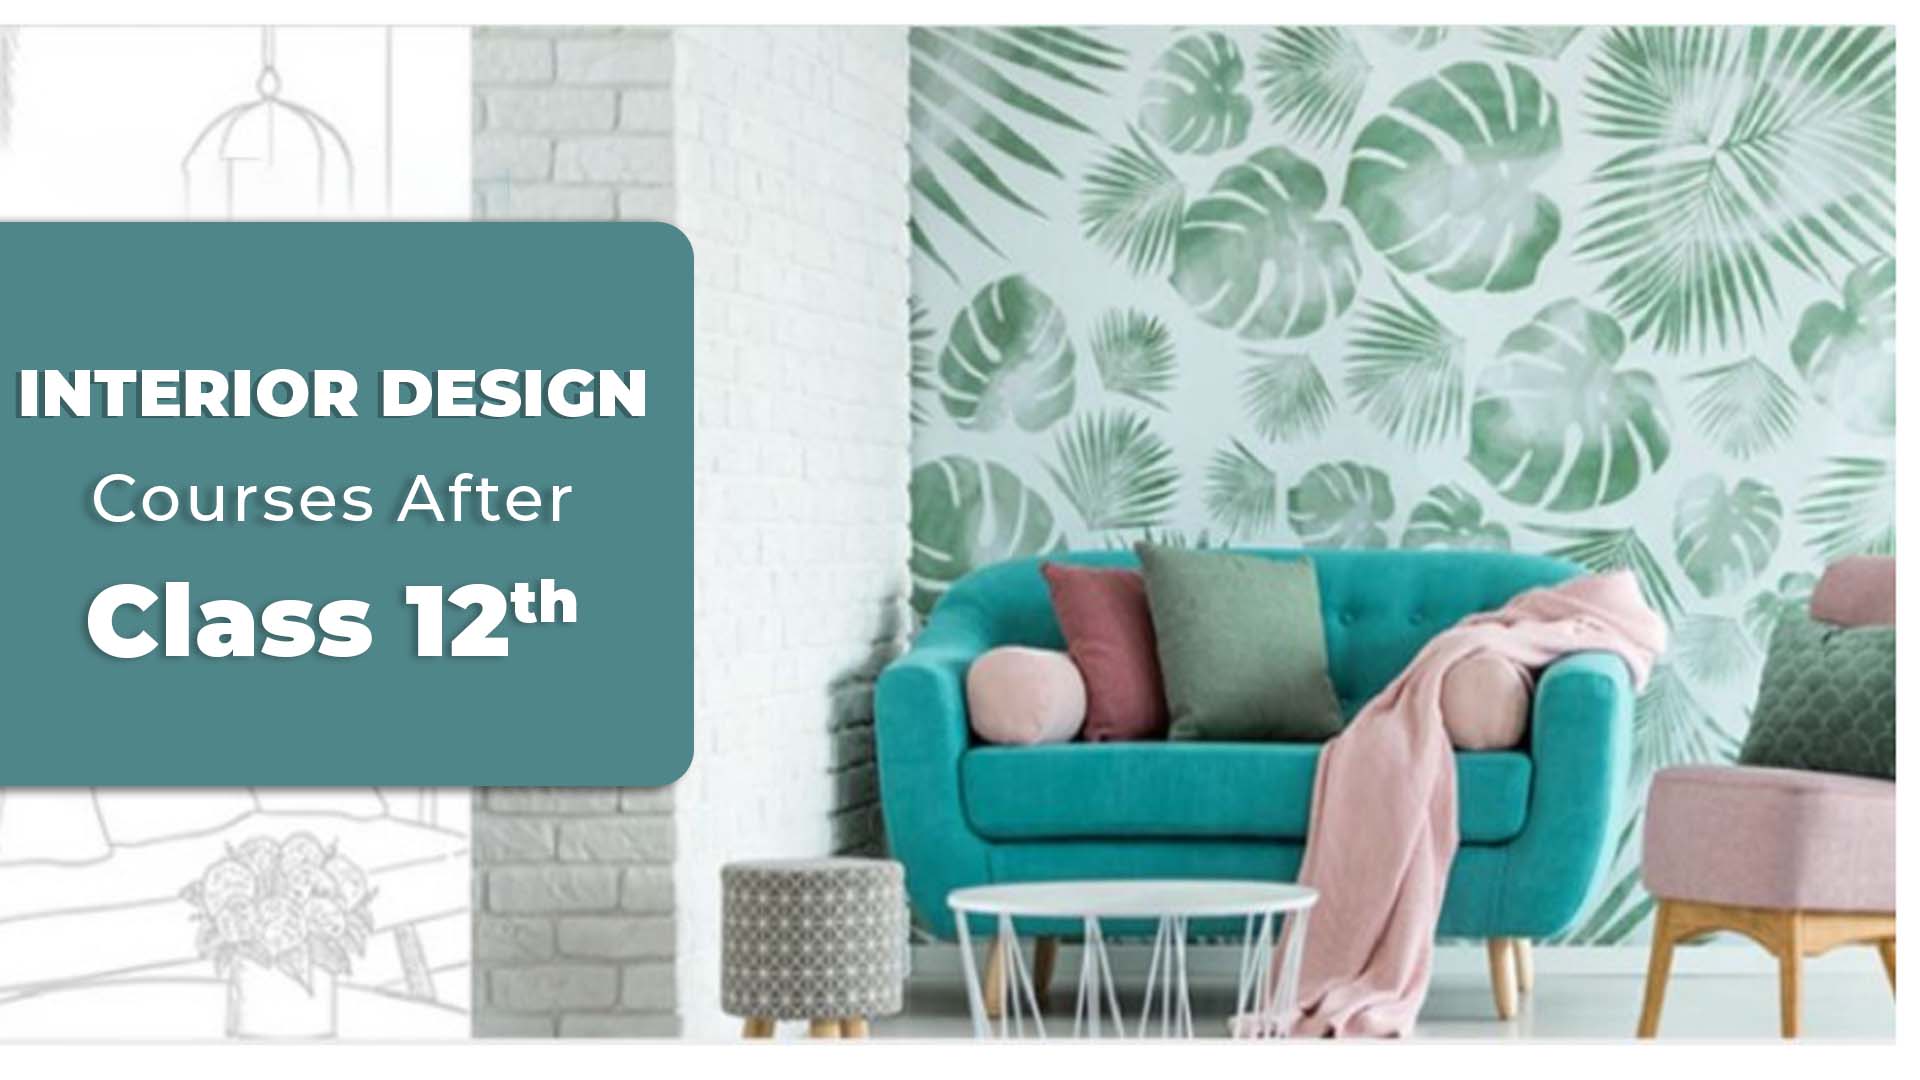 Interior Design Courses After Class 12th